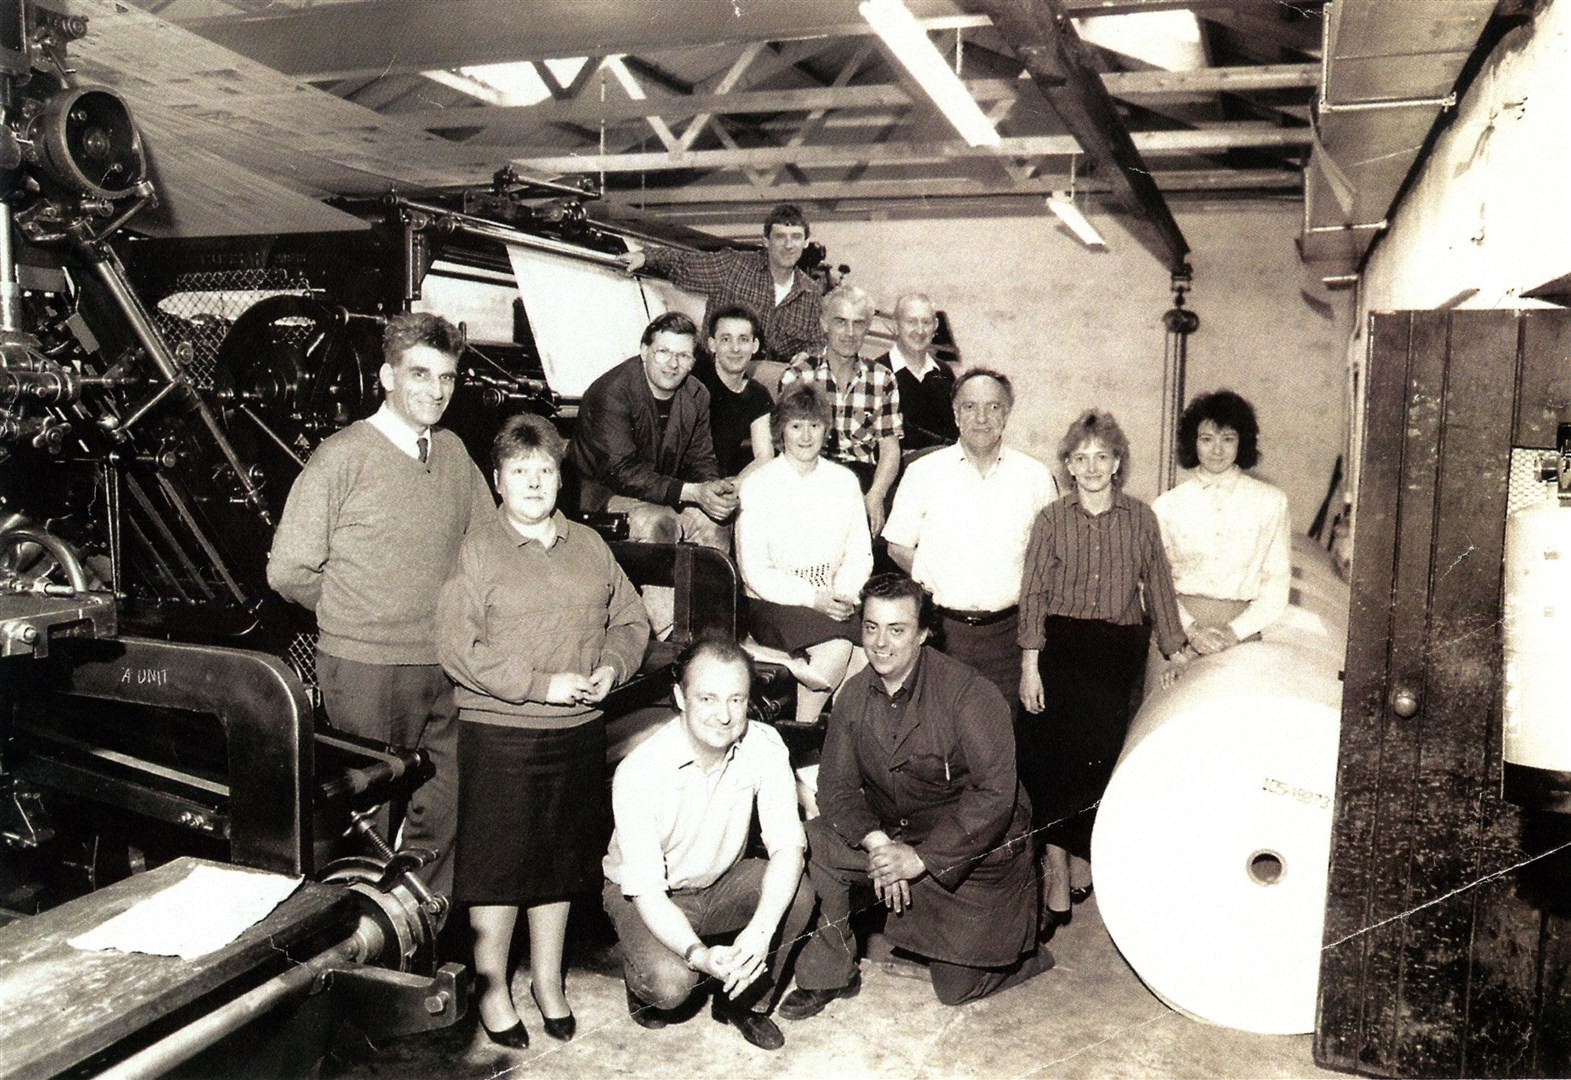 Staff from the Ross-shire Journal from days gone by in Dingwall.